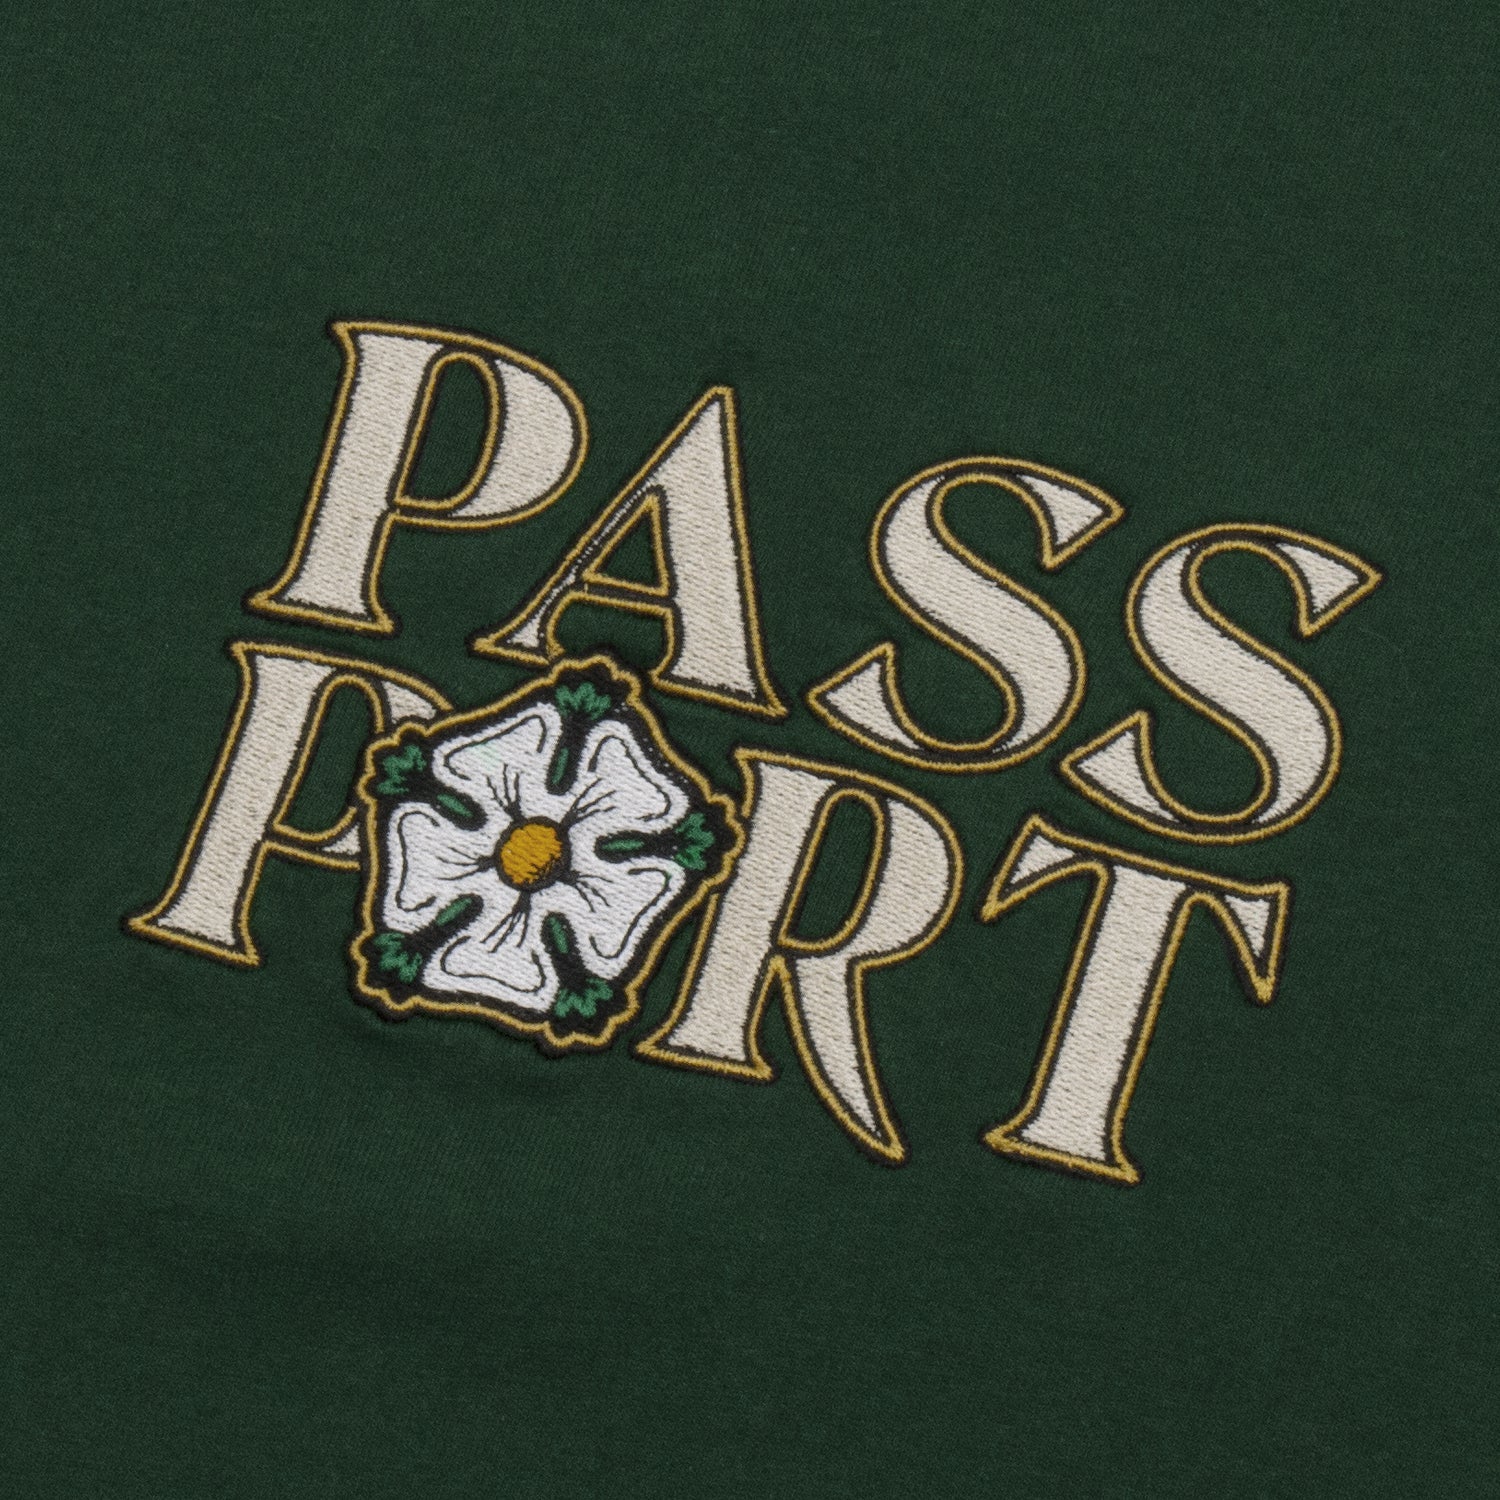 Pass~Port Rosa Embroidery Tee - Forest Green